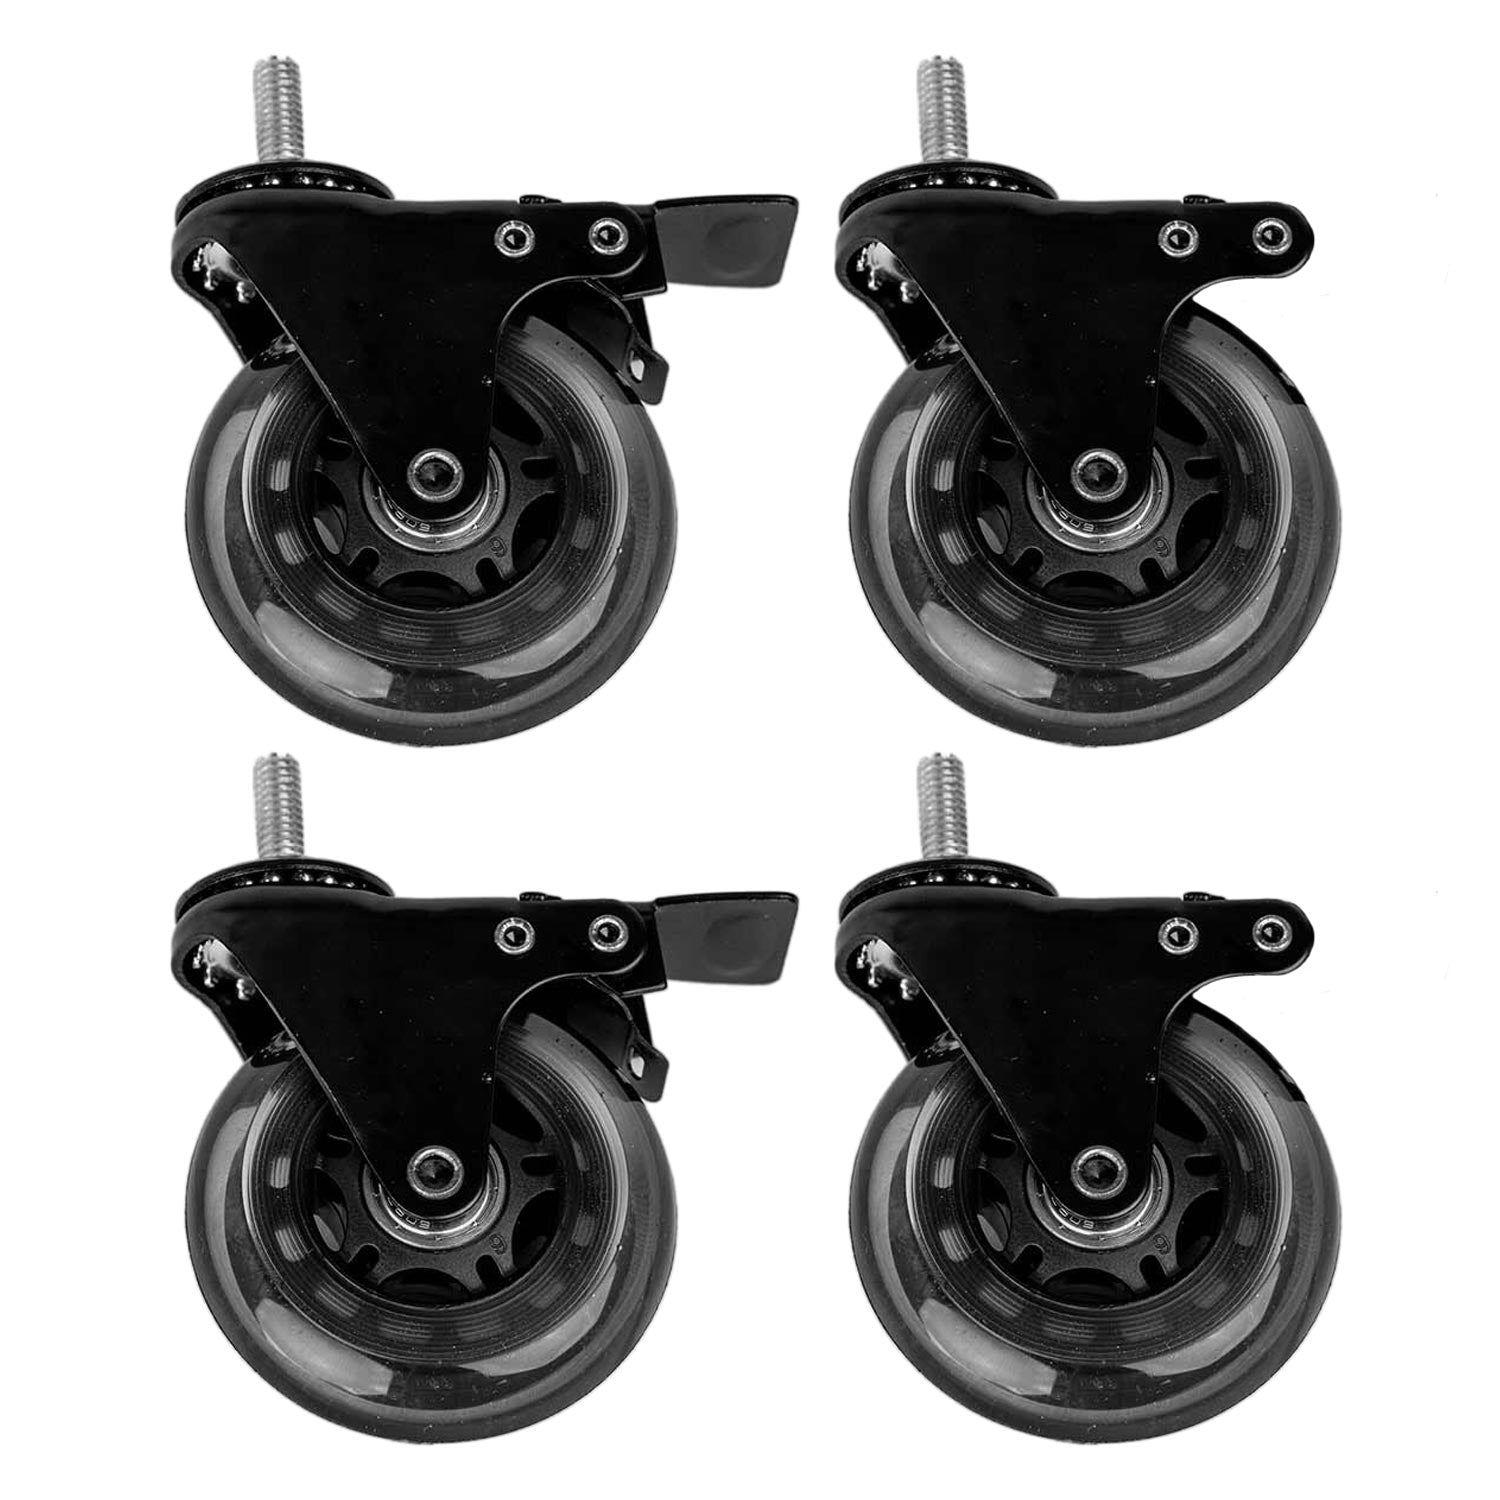 Caster Wheels for Timber Stoves (Set of 4)